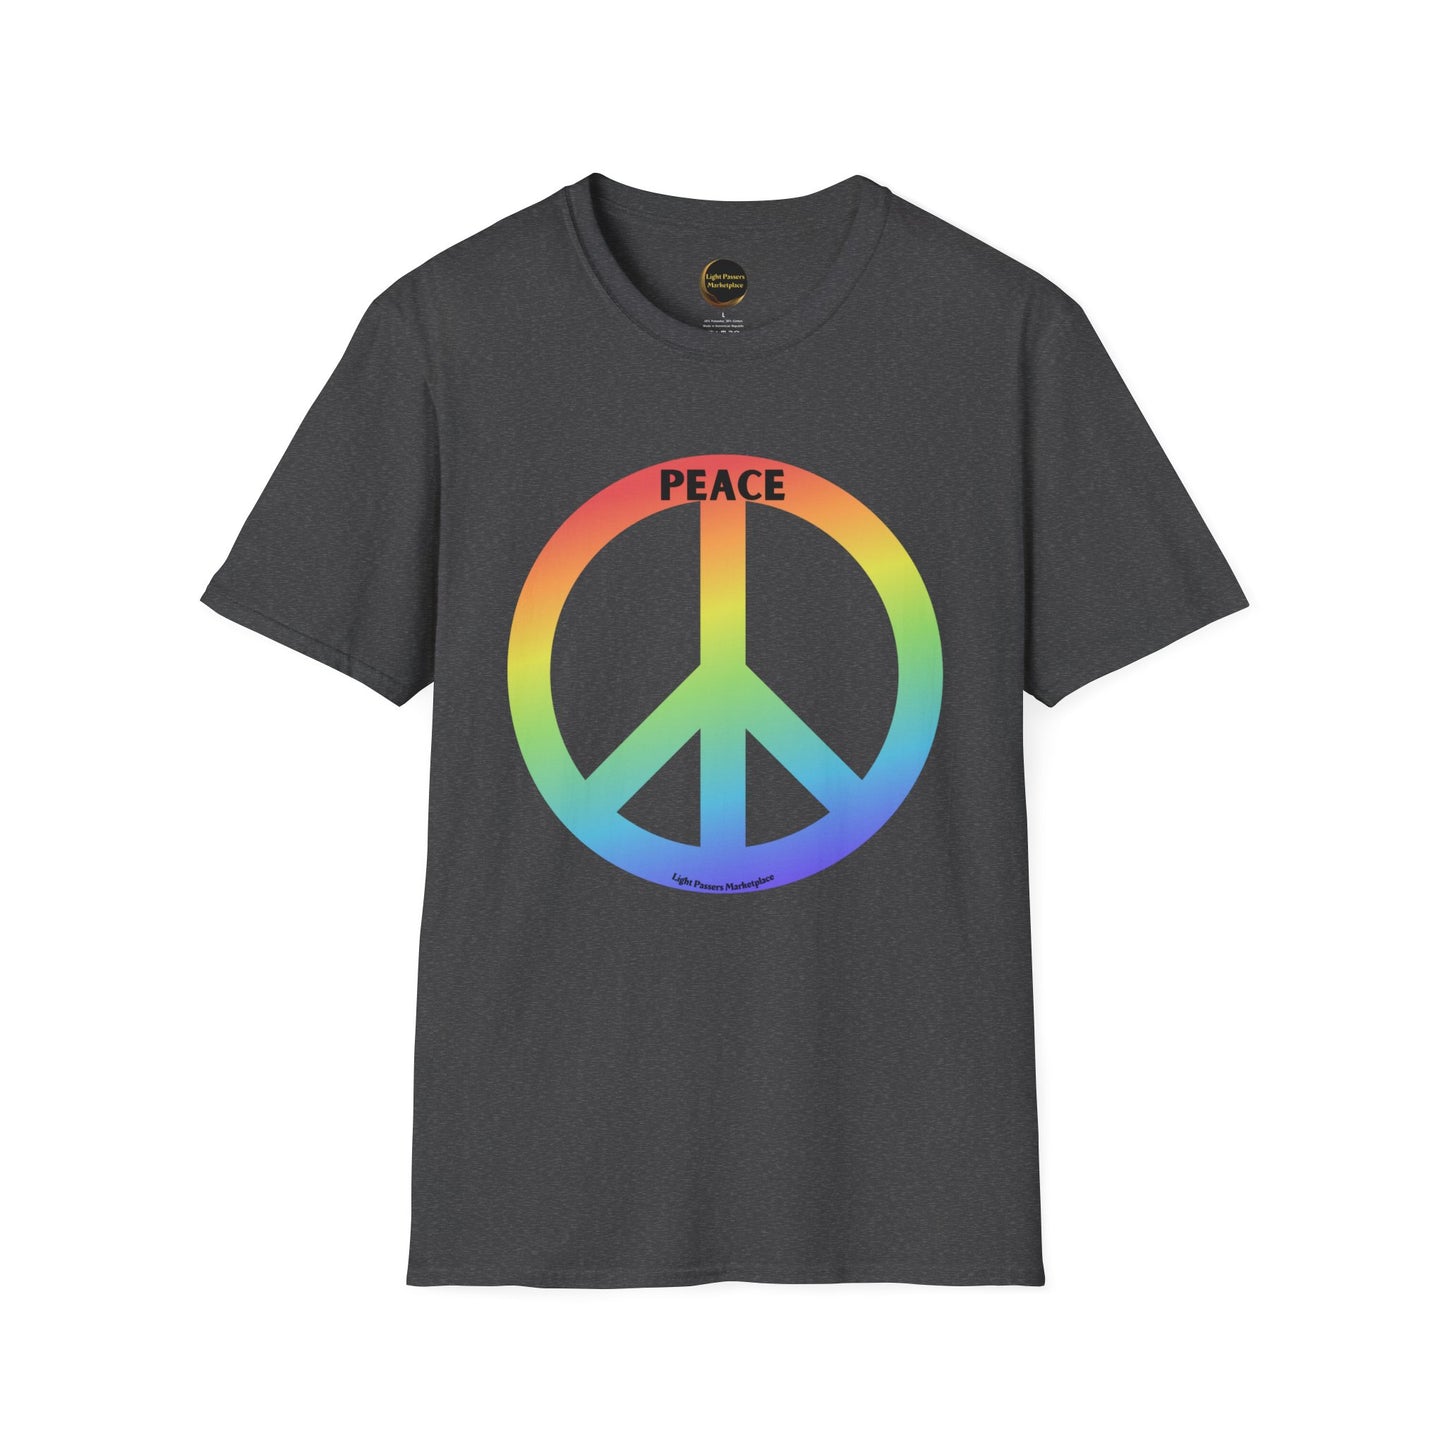 A grey unisex t-shirt featuring a rainbow peace sign design. Made of soft 100% cotton with twill tape shoulders and ribbed collar. Ethically sourced and Oeko-Tex certified for quality.